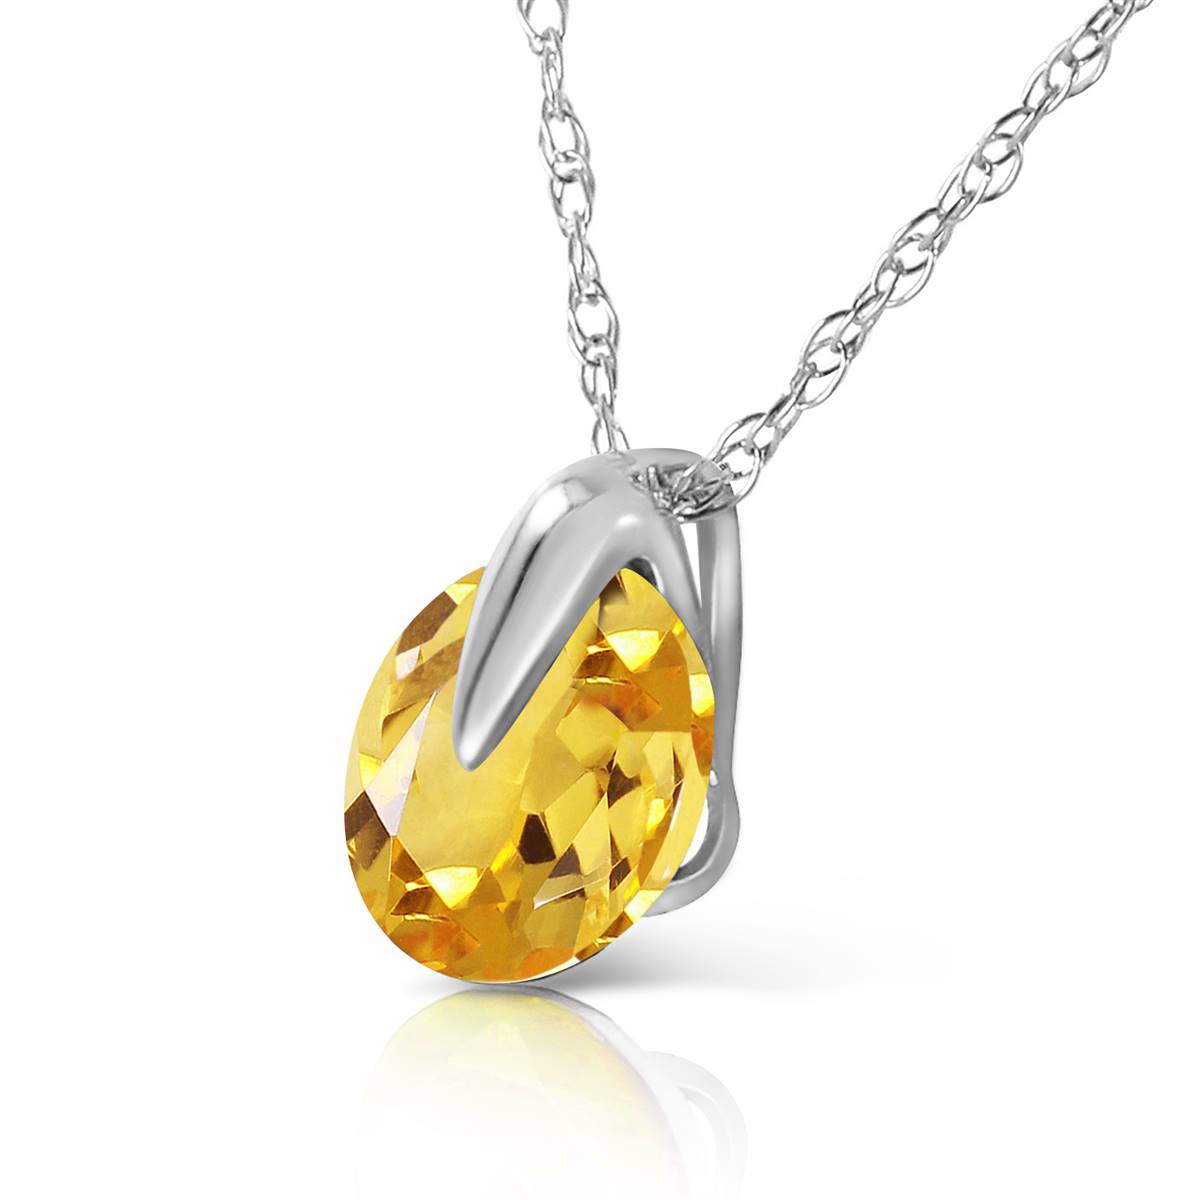 0.8 Carat 14K Solid White Gold Castles Not In Air Citrine Necklace